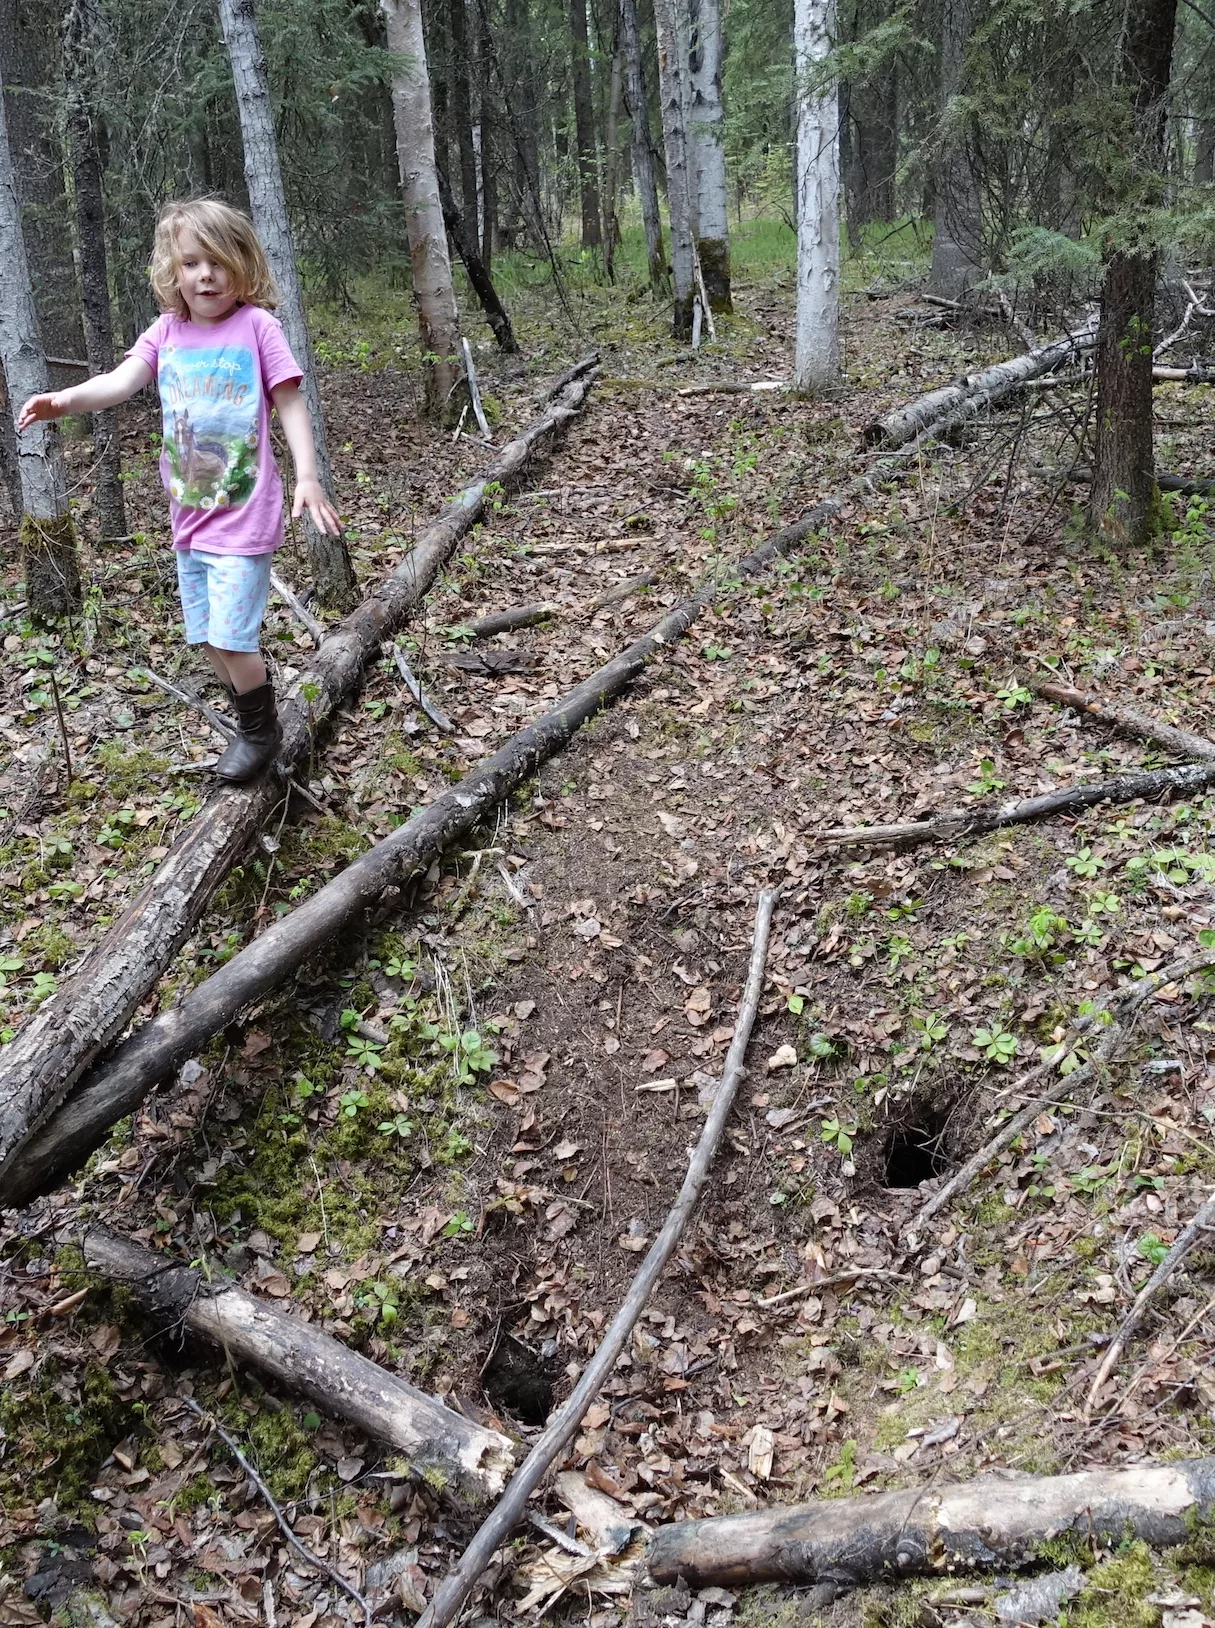 Six-year-old Rose Bulger balances on a fallen log above two holes in the forest floor related to permafrost thaw.

 